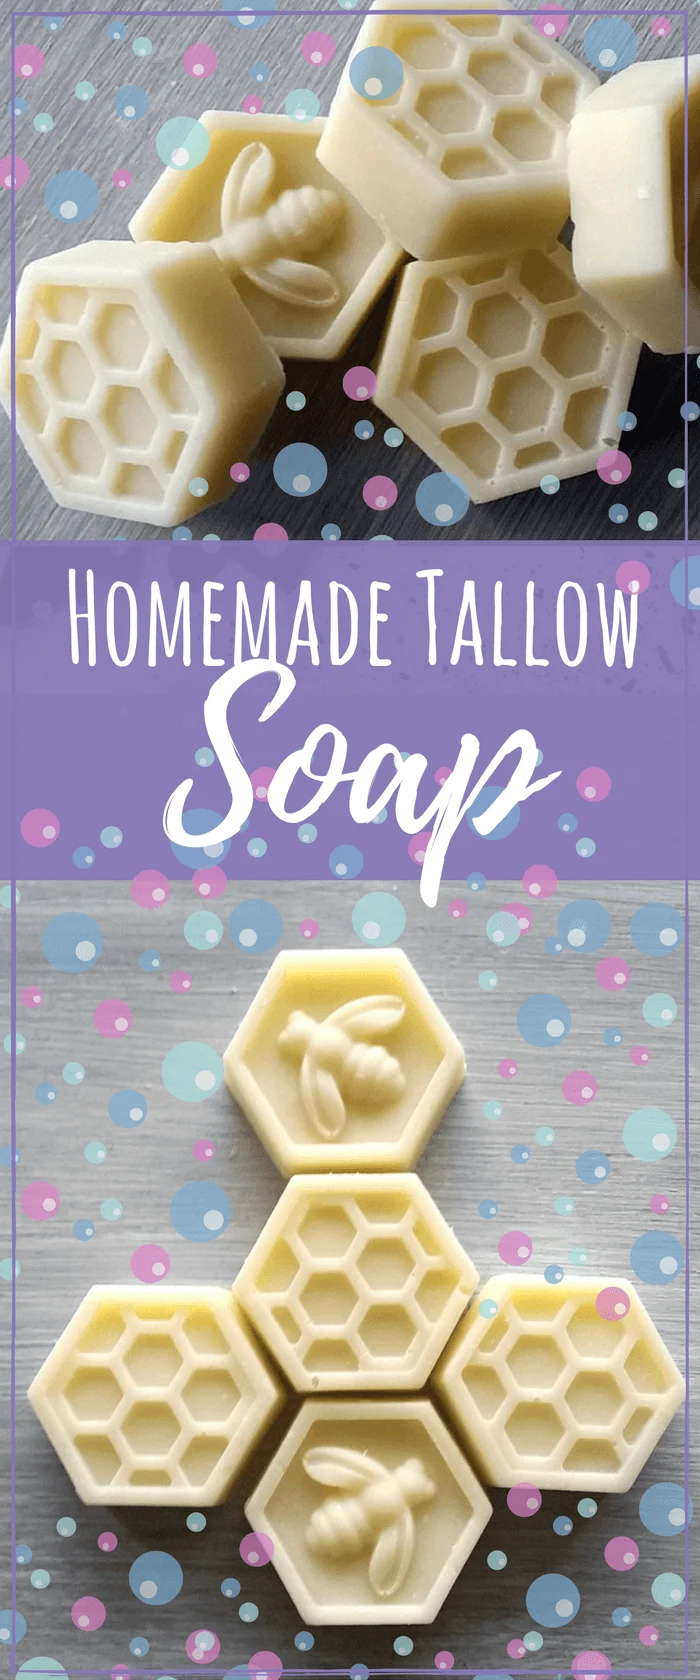 Cold-Process Tallow Soap Recipe - Our Oily House